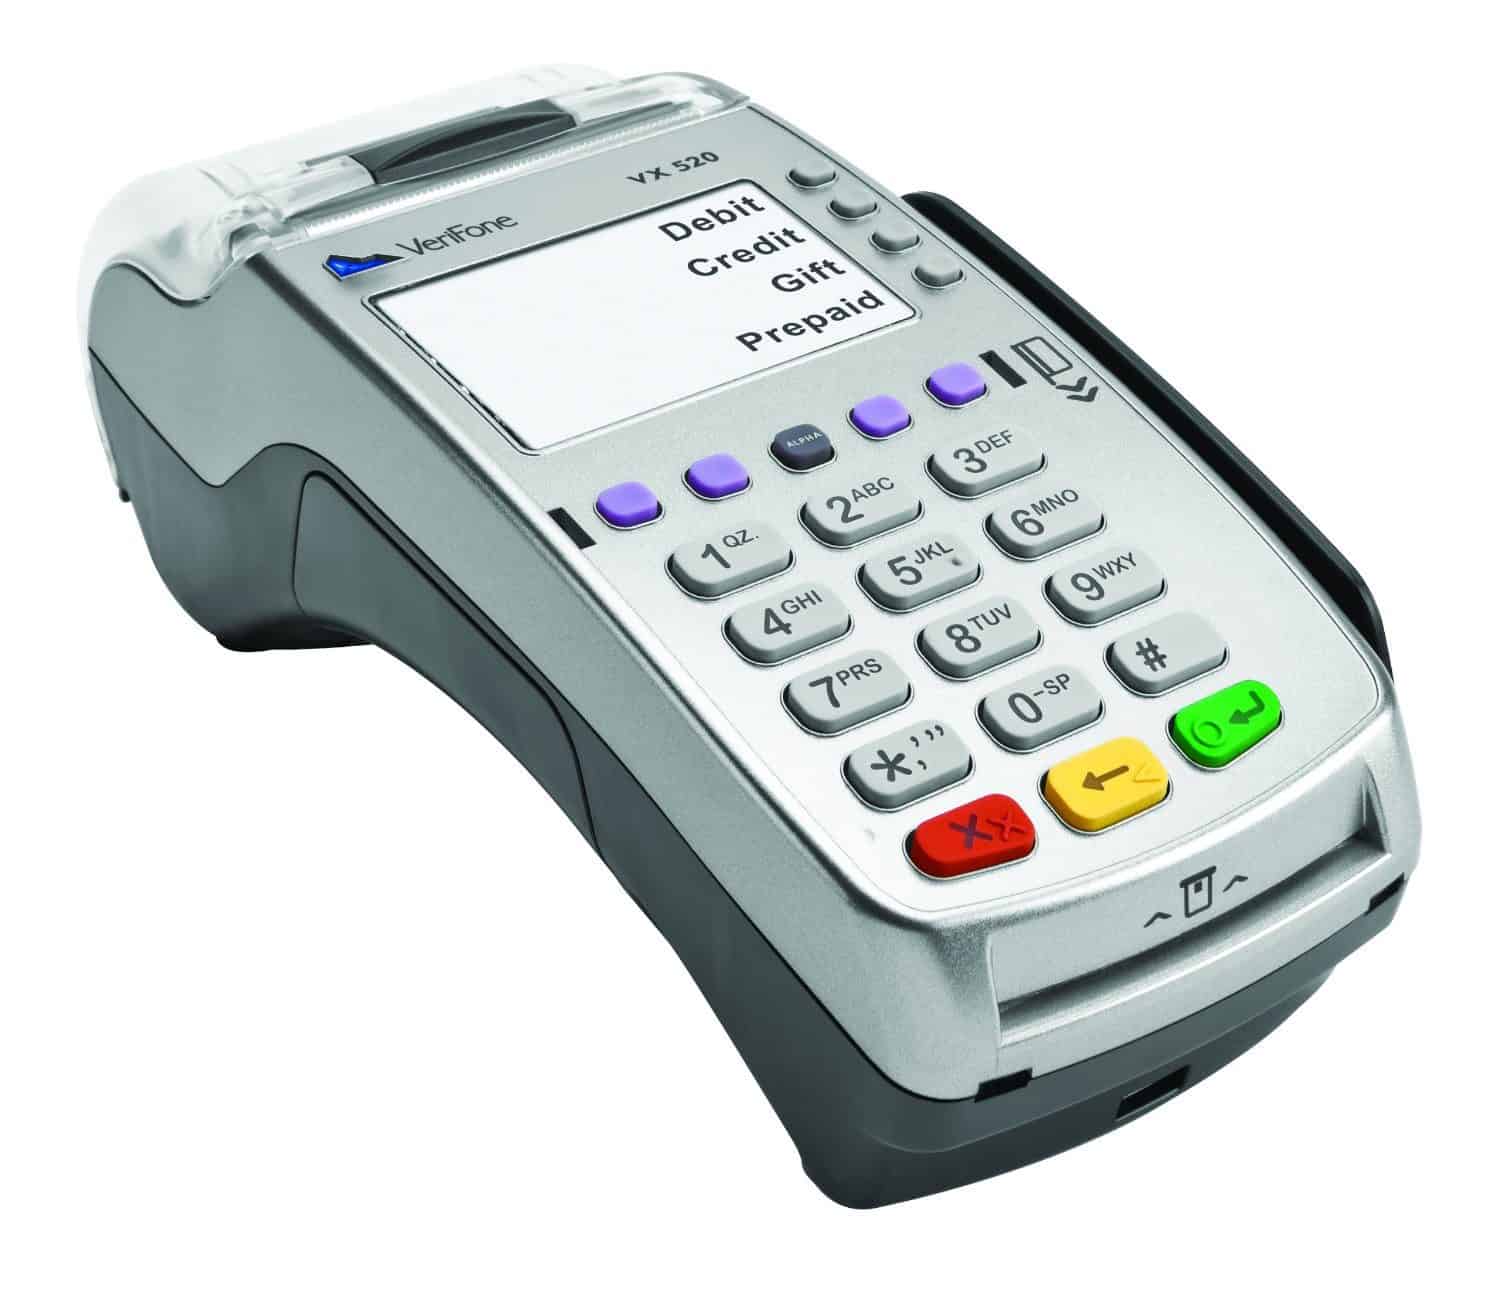 Verifone MX870 Terminal Credit Card Reader With Stylus for sale online 